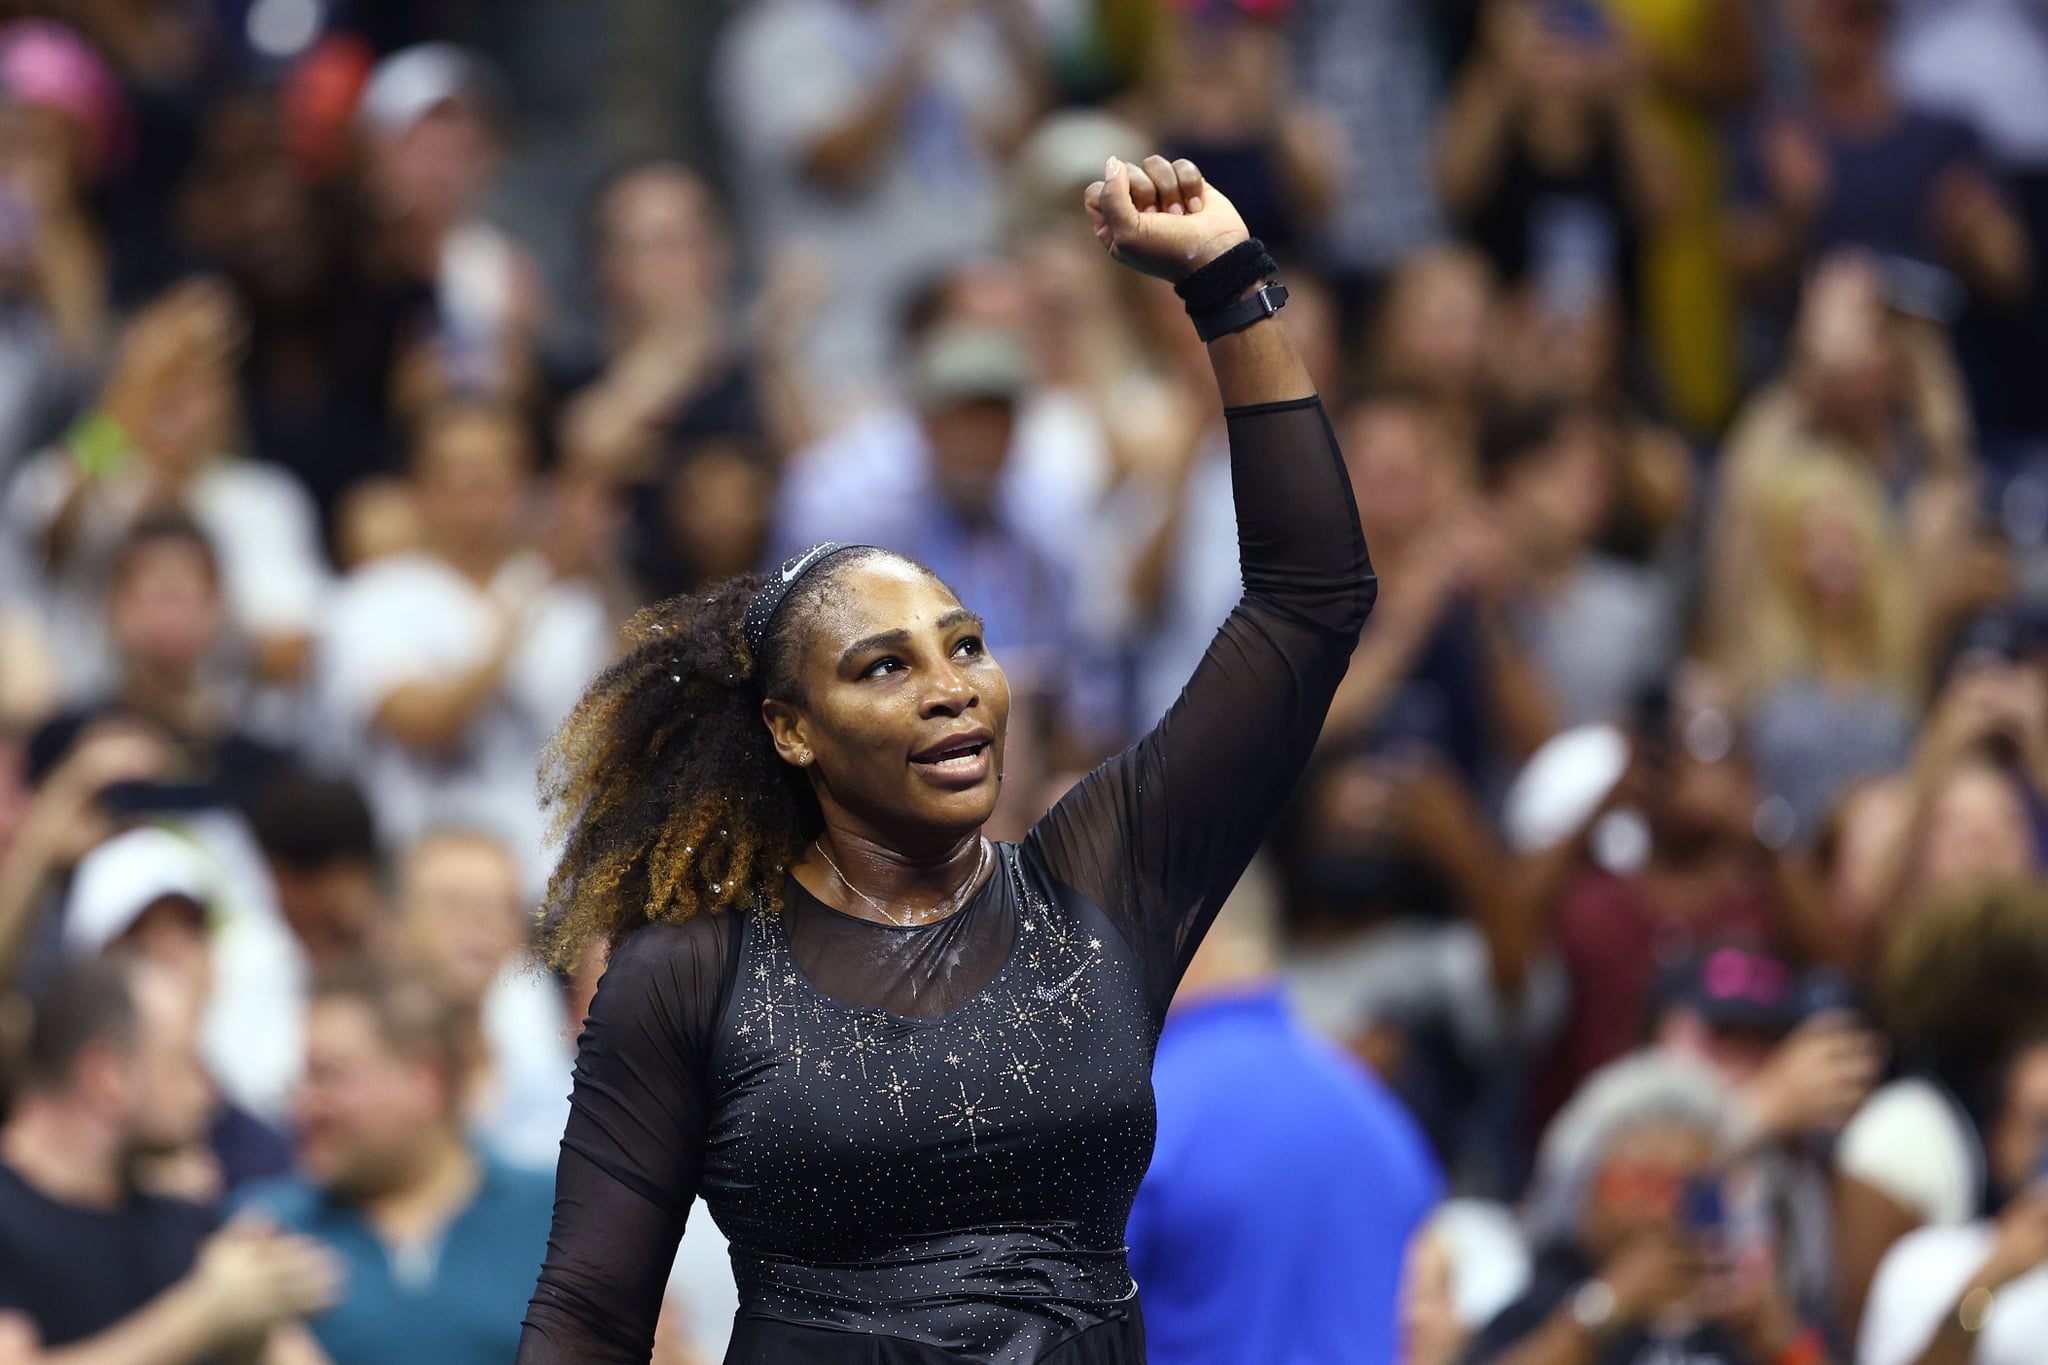 NEW YORK, NEW YORK - AUGUST 29: Serena Williams of the United States celebrates after defeating Danka Kovinic of Montenegro during the Women's Singles First Round on Day One of the 2022 US Open at USTA Billie Jean King National Tennis Center on August 29, 2022 in the Flushing neighborhood of the Queens borough of New York City. (Photo by Elsa/Getty Images)